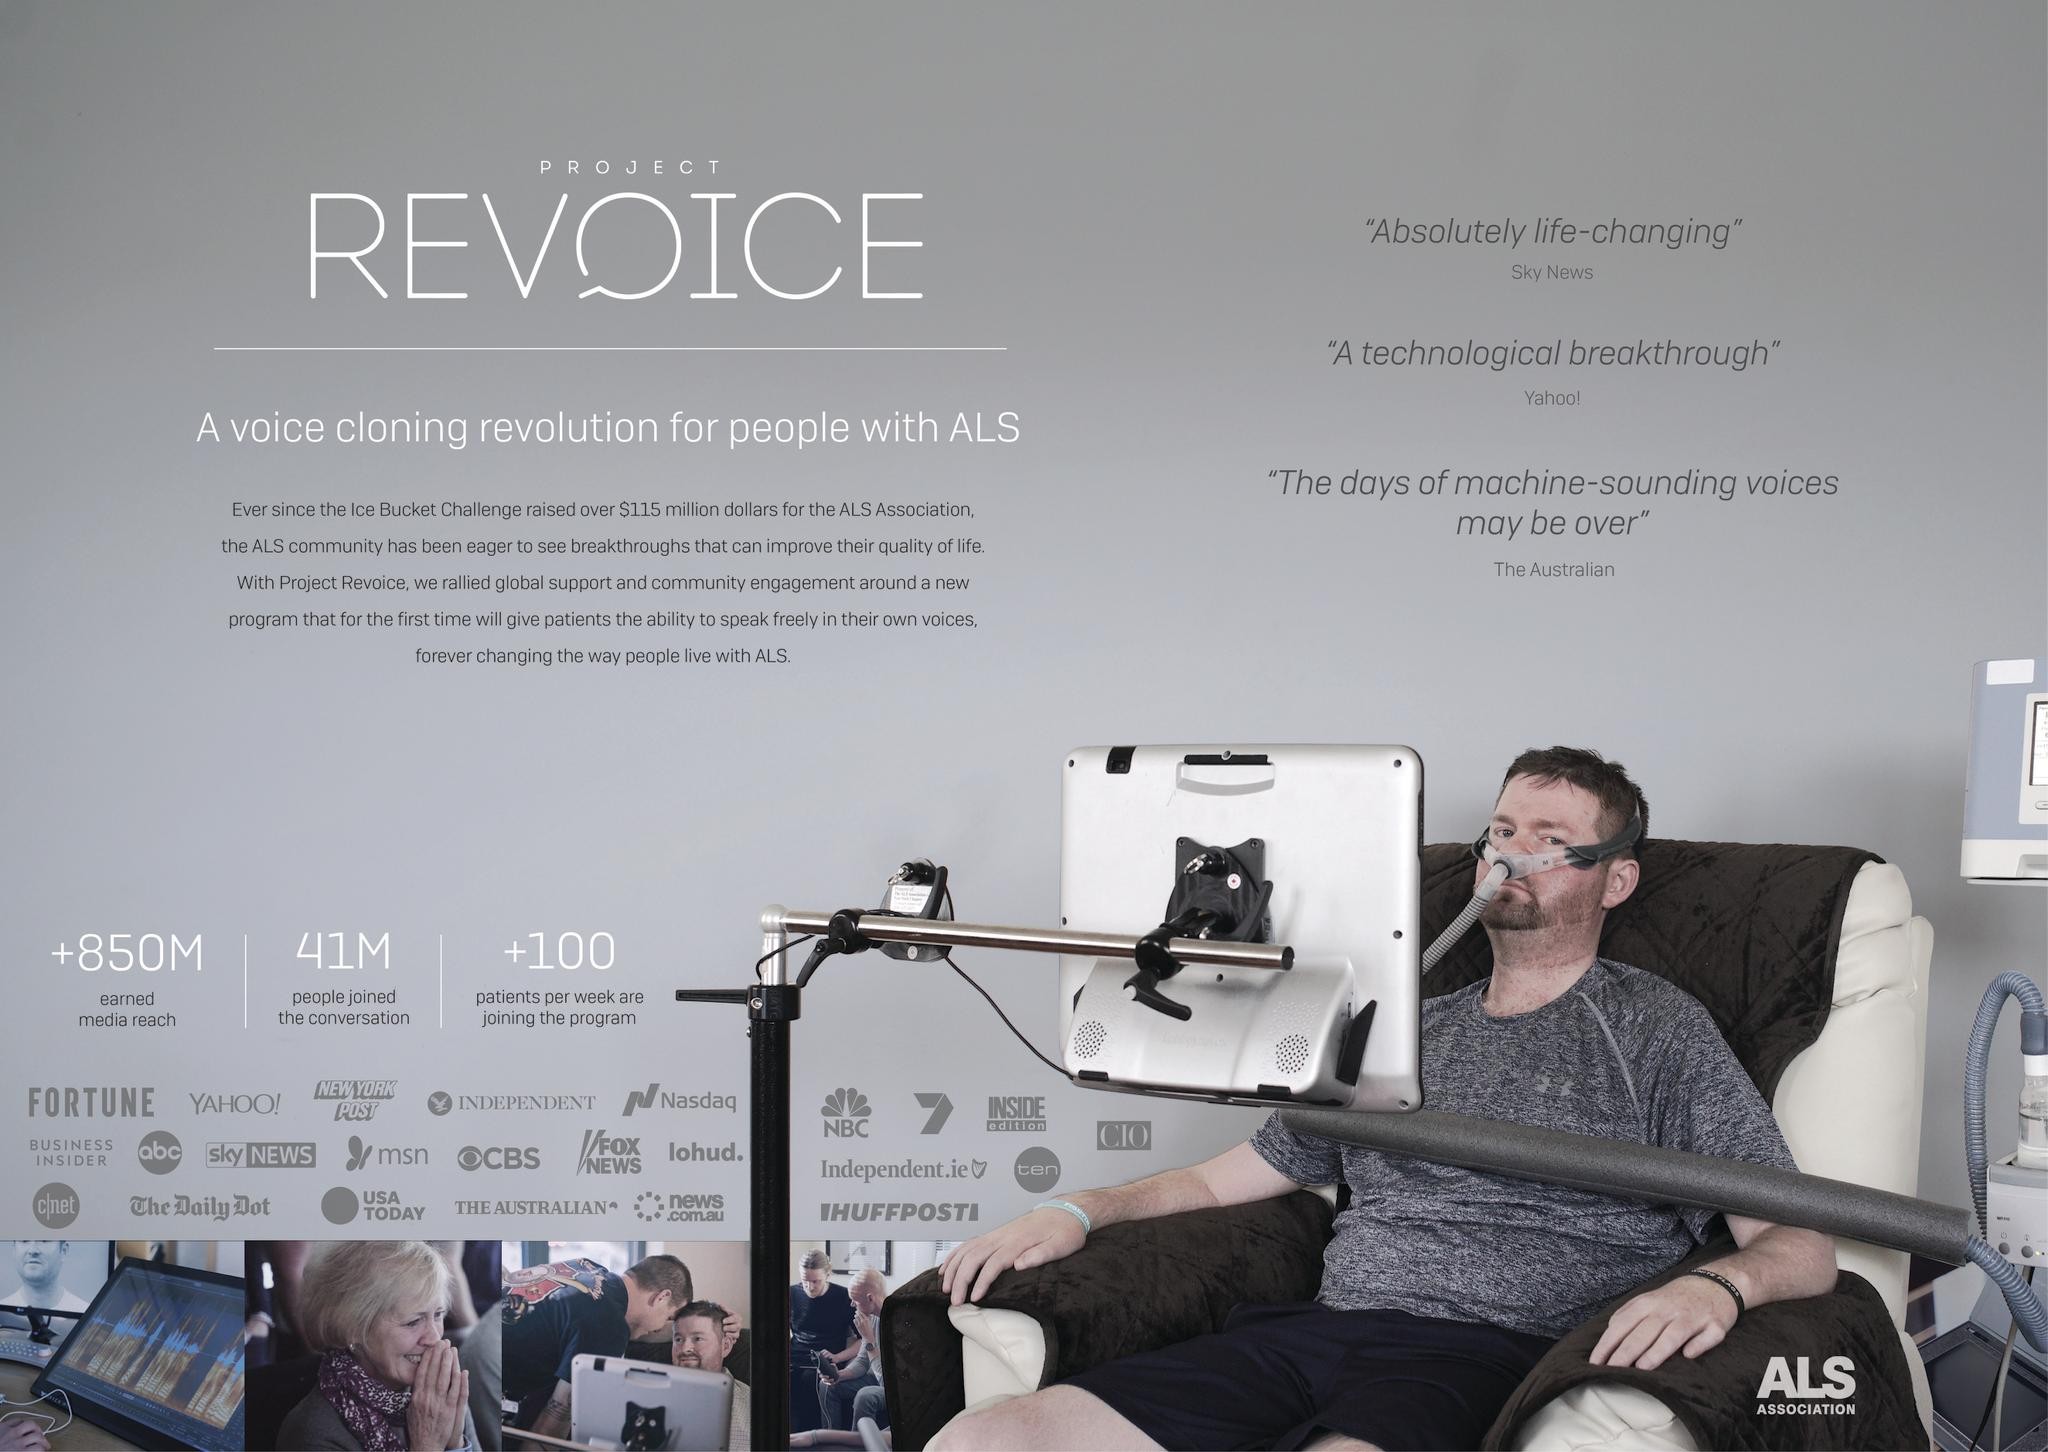 PROJECT REVOICE